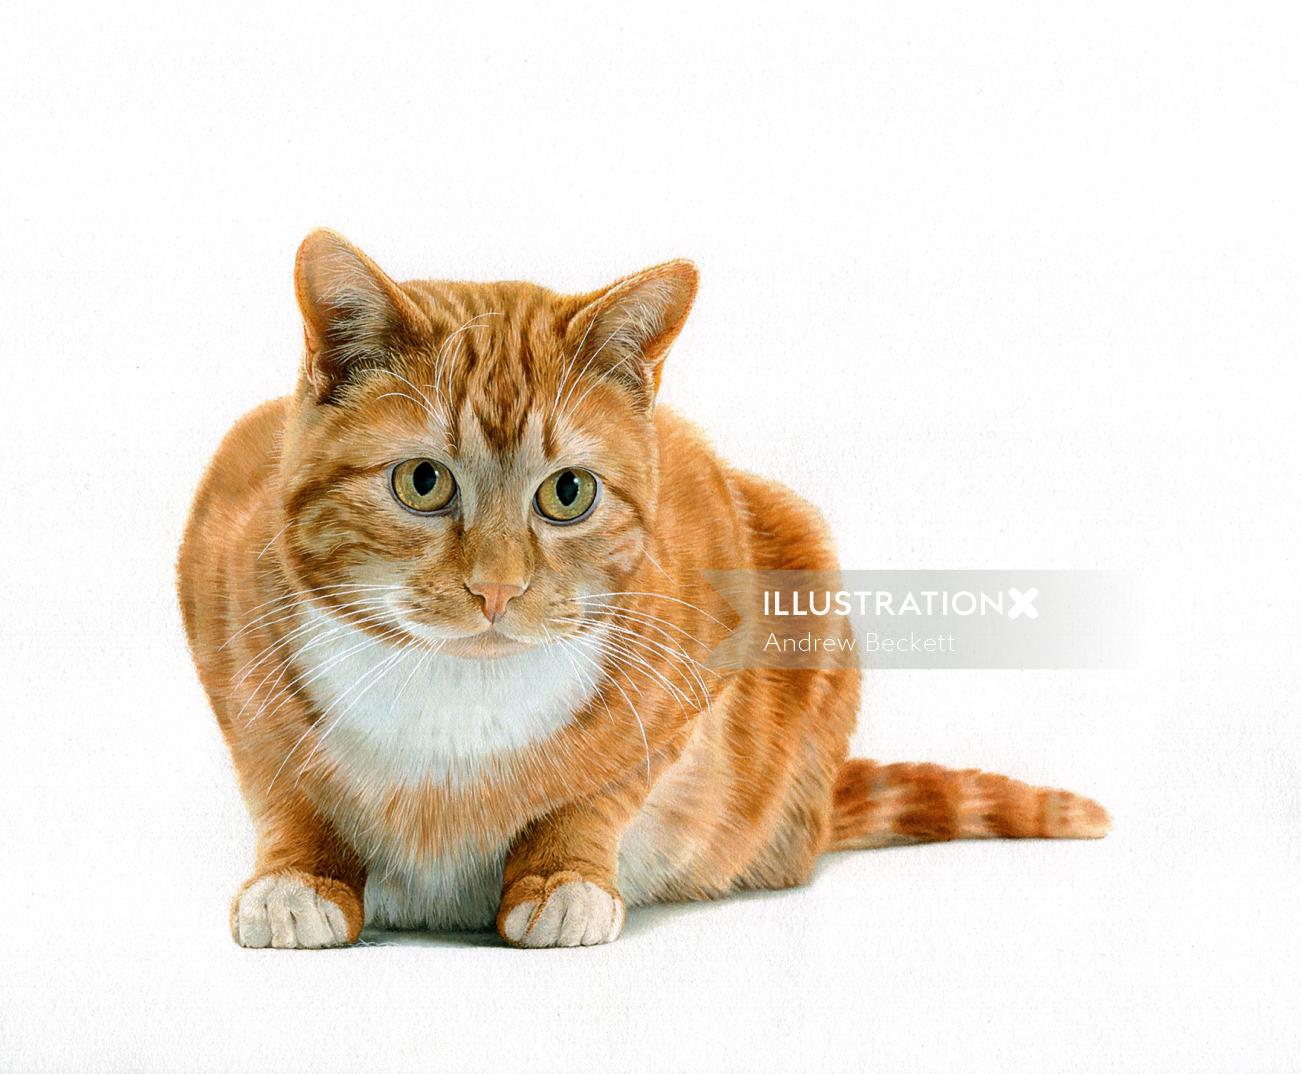 Ginger cats have red-to-orange tabbies